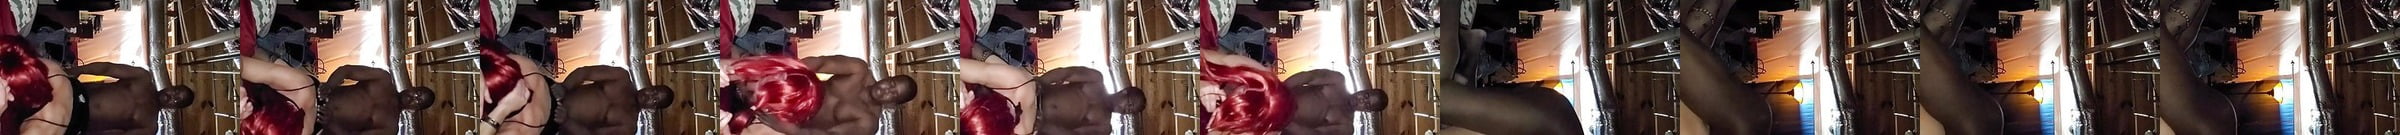 White Sissy Crossdresser Spreads Legs And Gets Fucked On